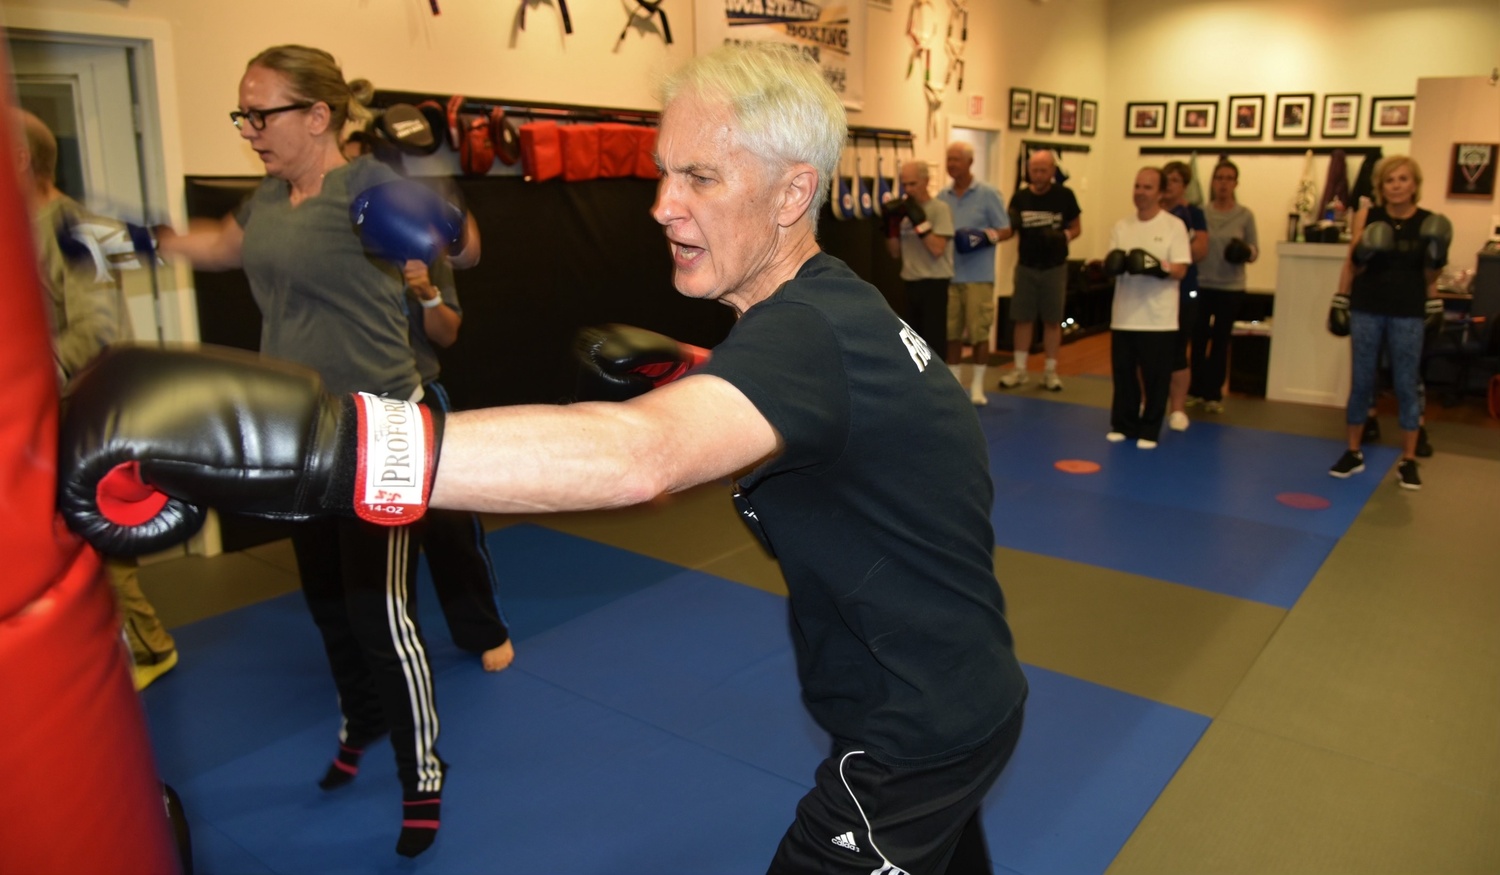 A powerful punch from Stan Stokowski. COURTESY MICHELLE DEL GIORNO